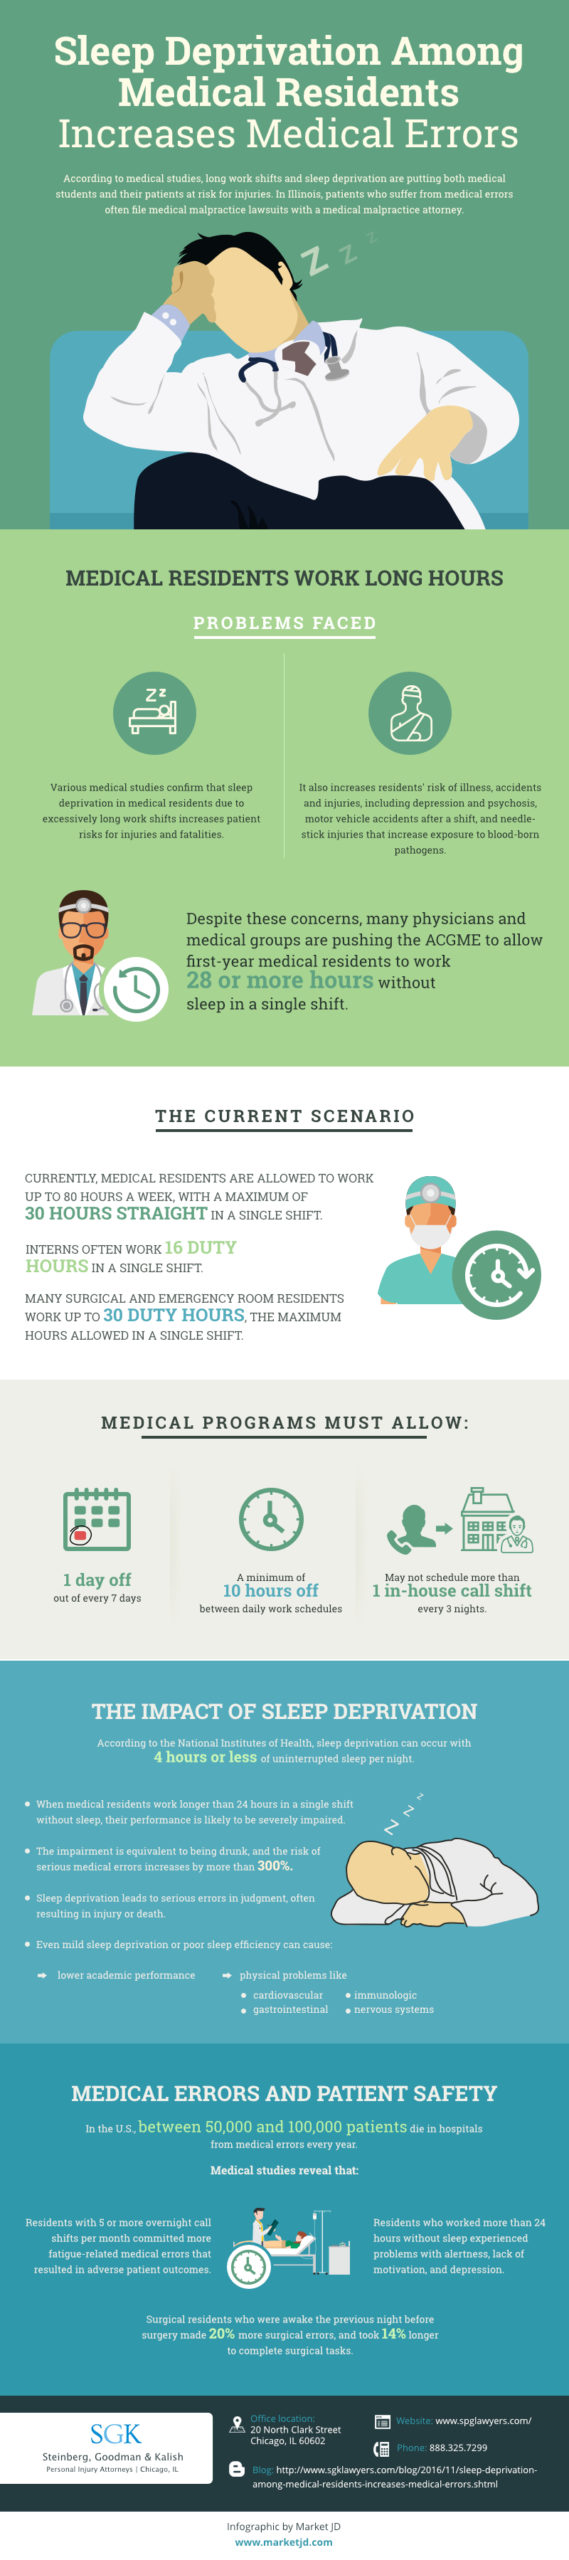 infographic_Sleep Deprivation Among Medical Residents Increases Medical Errors.jpg